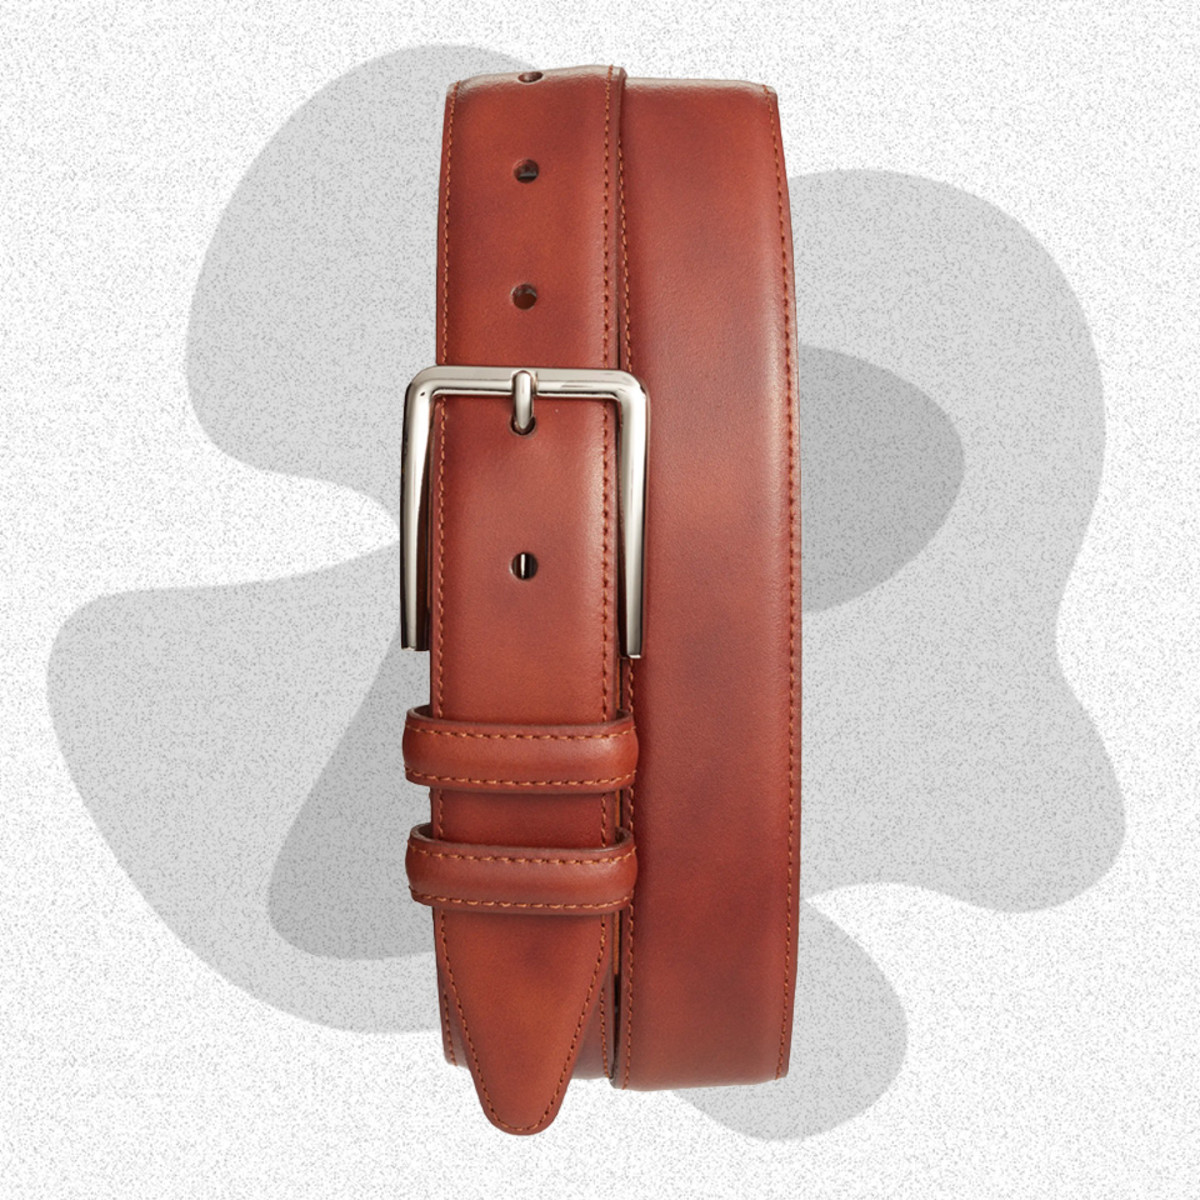 The Best Suede Belts for Every Type of Outfit